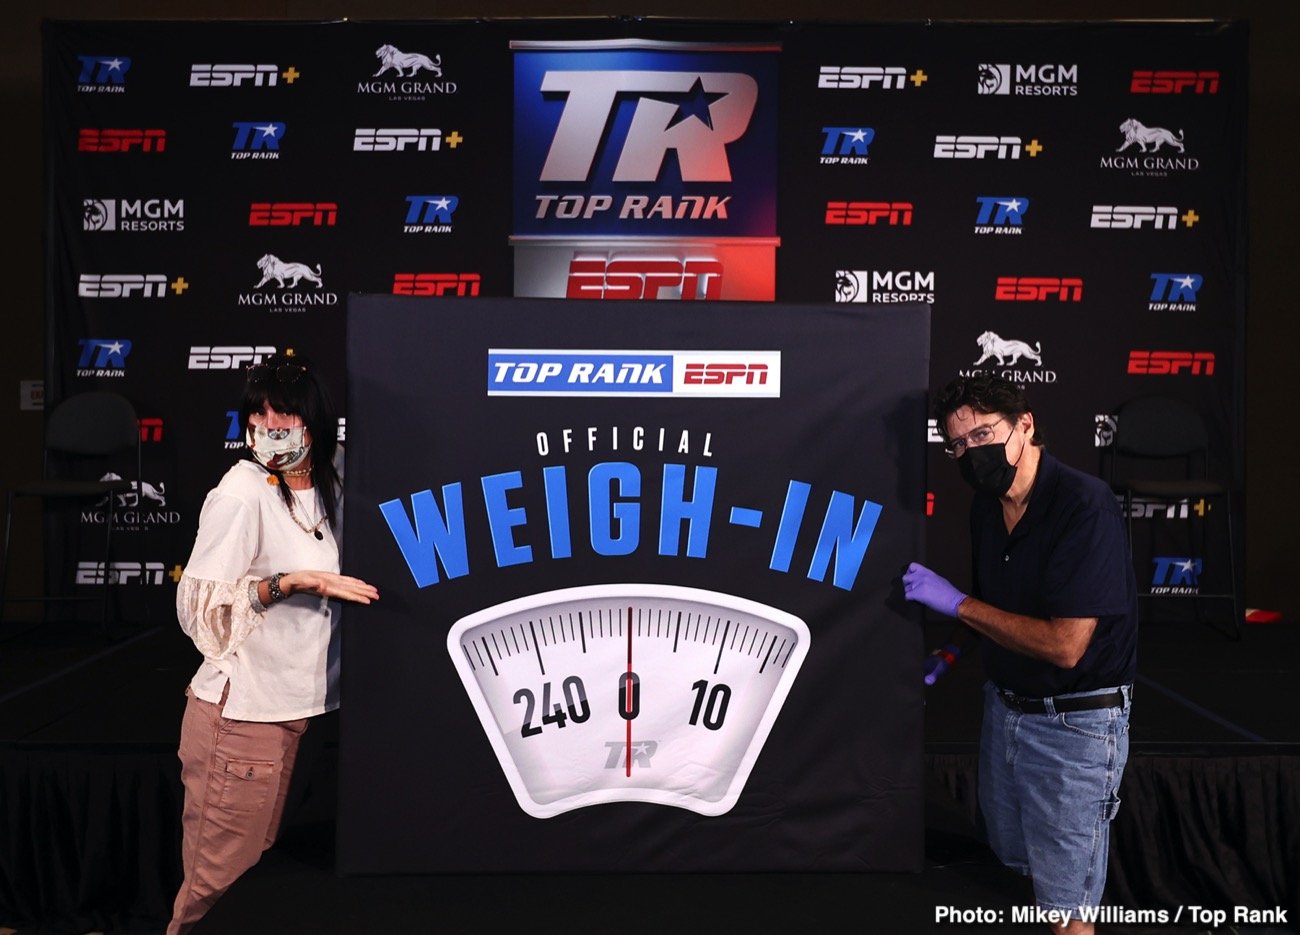 Carlos Takam vs Jerry Forrest Official ESPN Weigh In Results